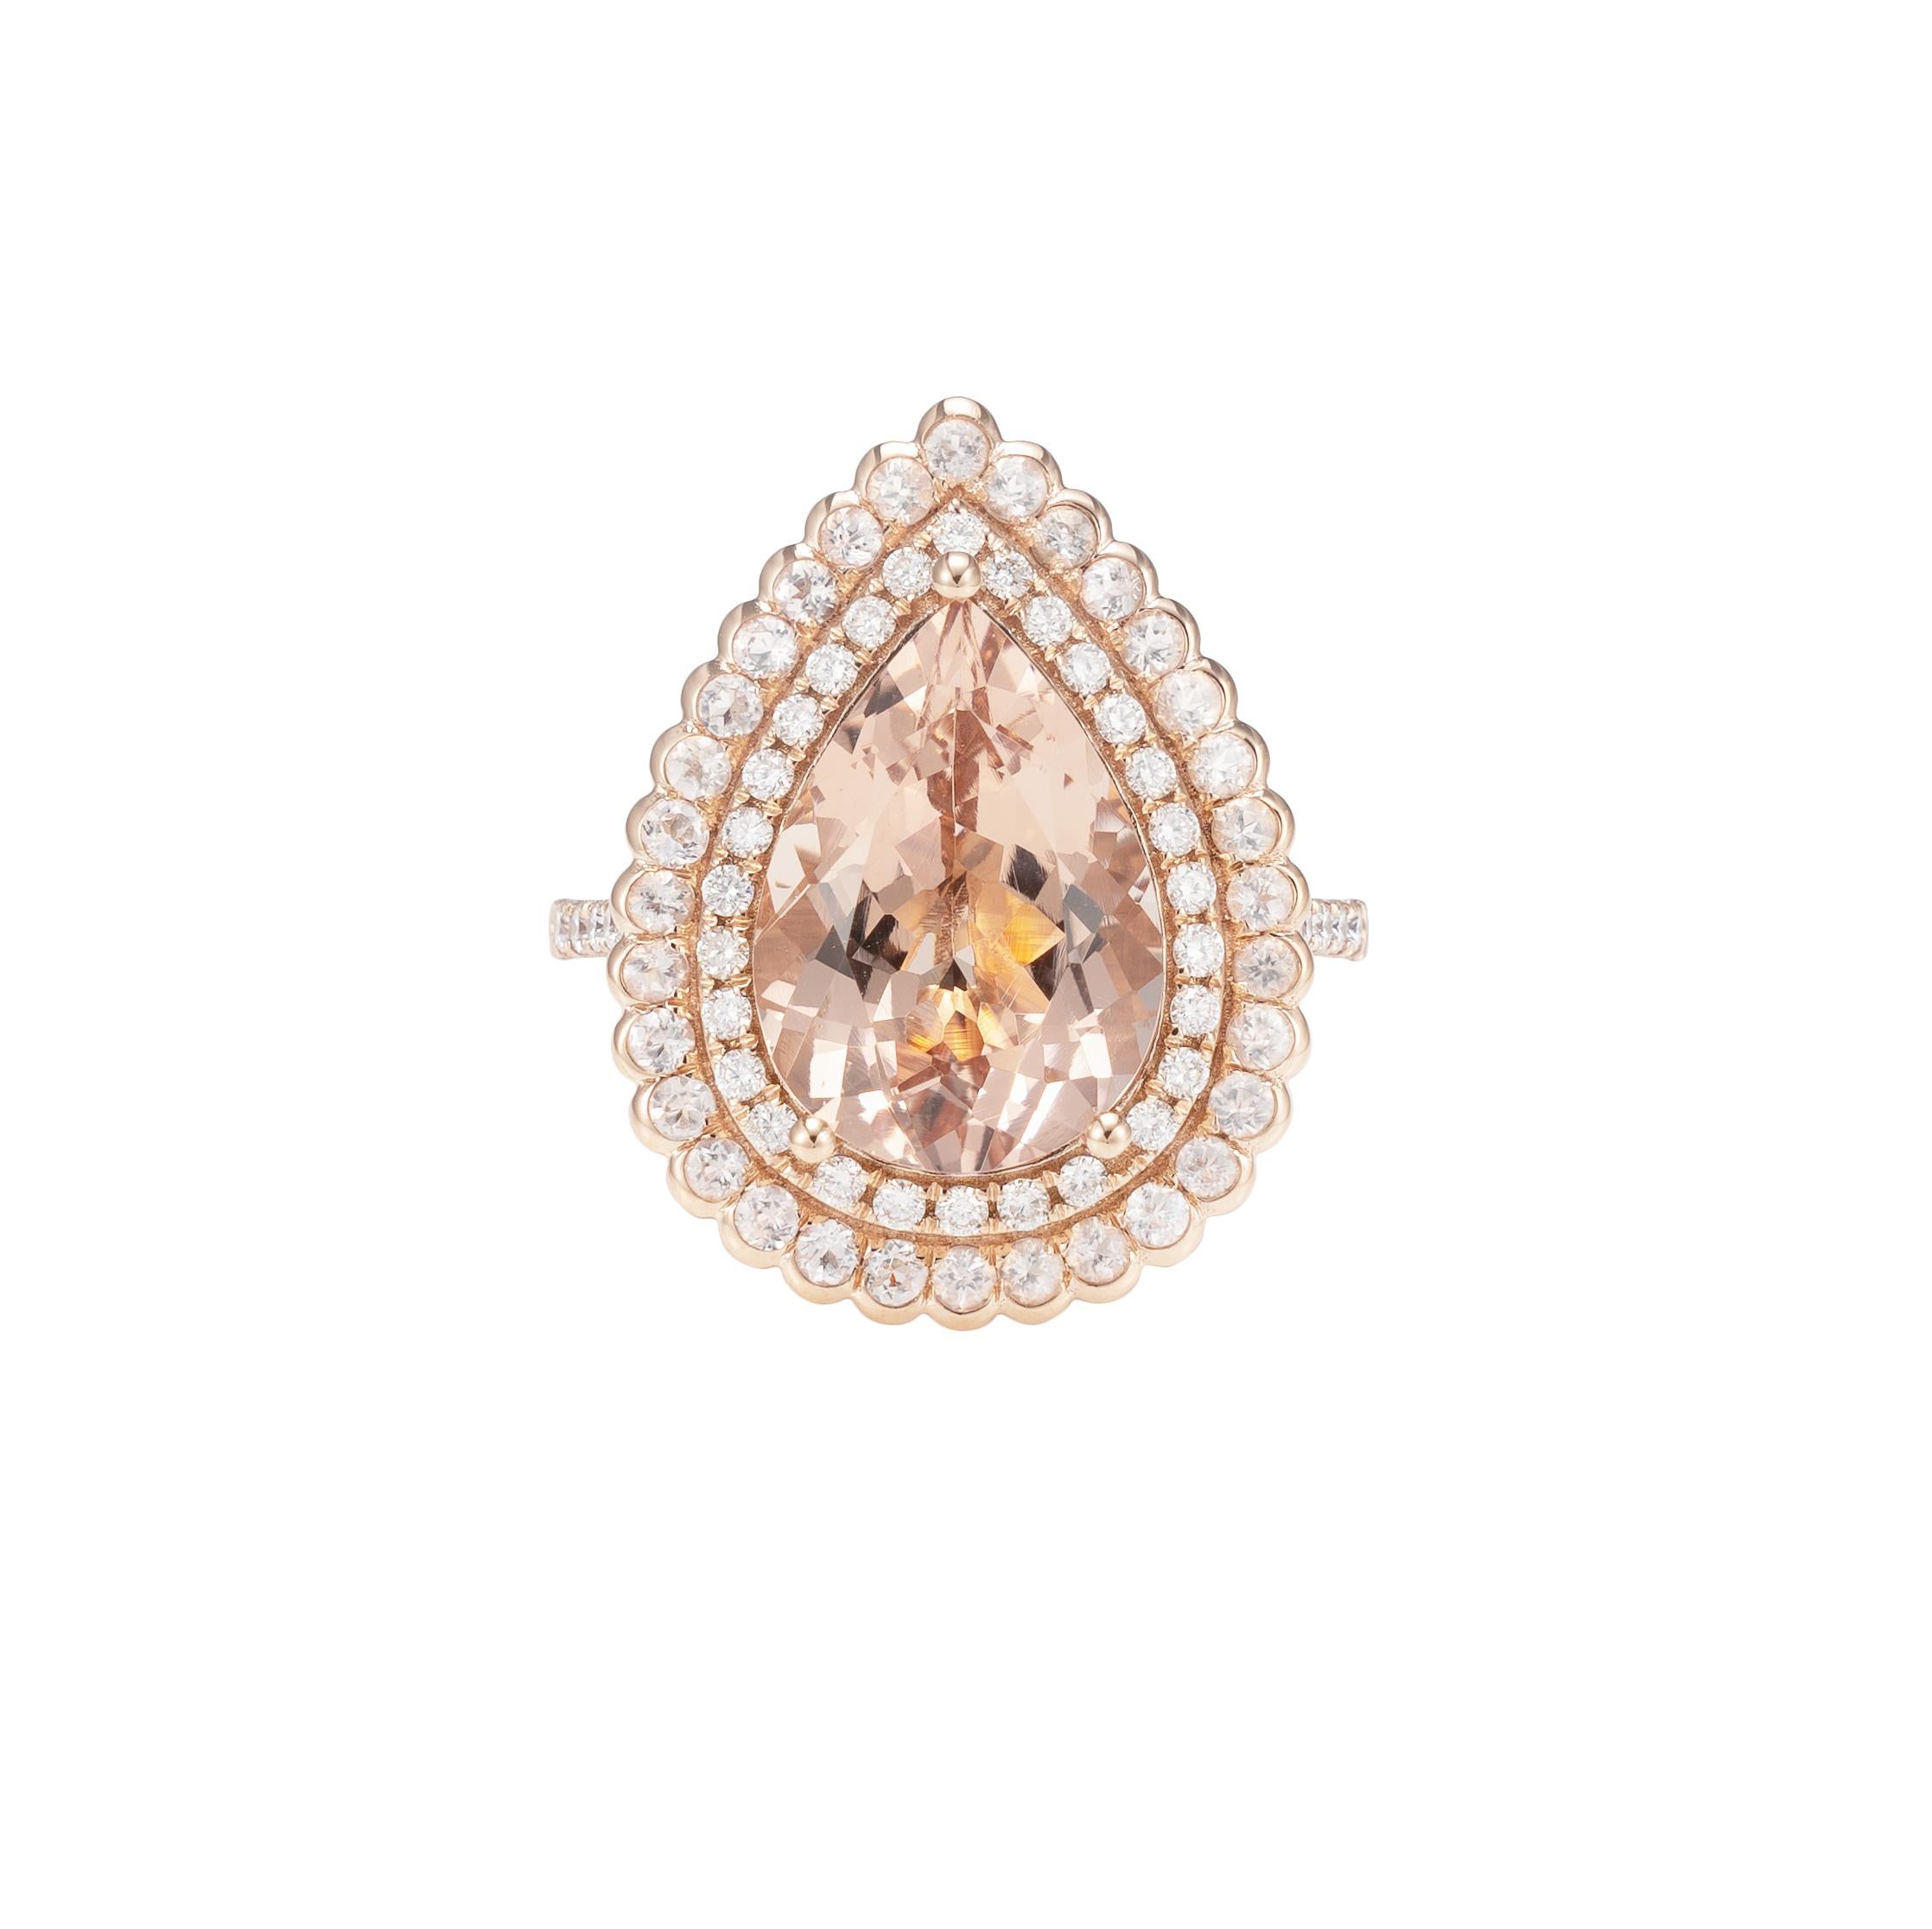 Contemporary 4.9 Carat Morganite and Diamond Ring in 18 Karat Rose Gold For Sale